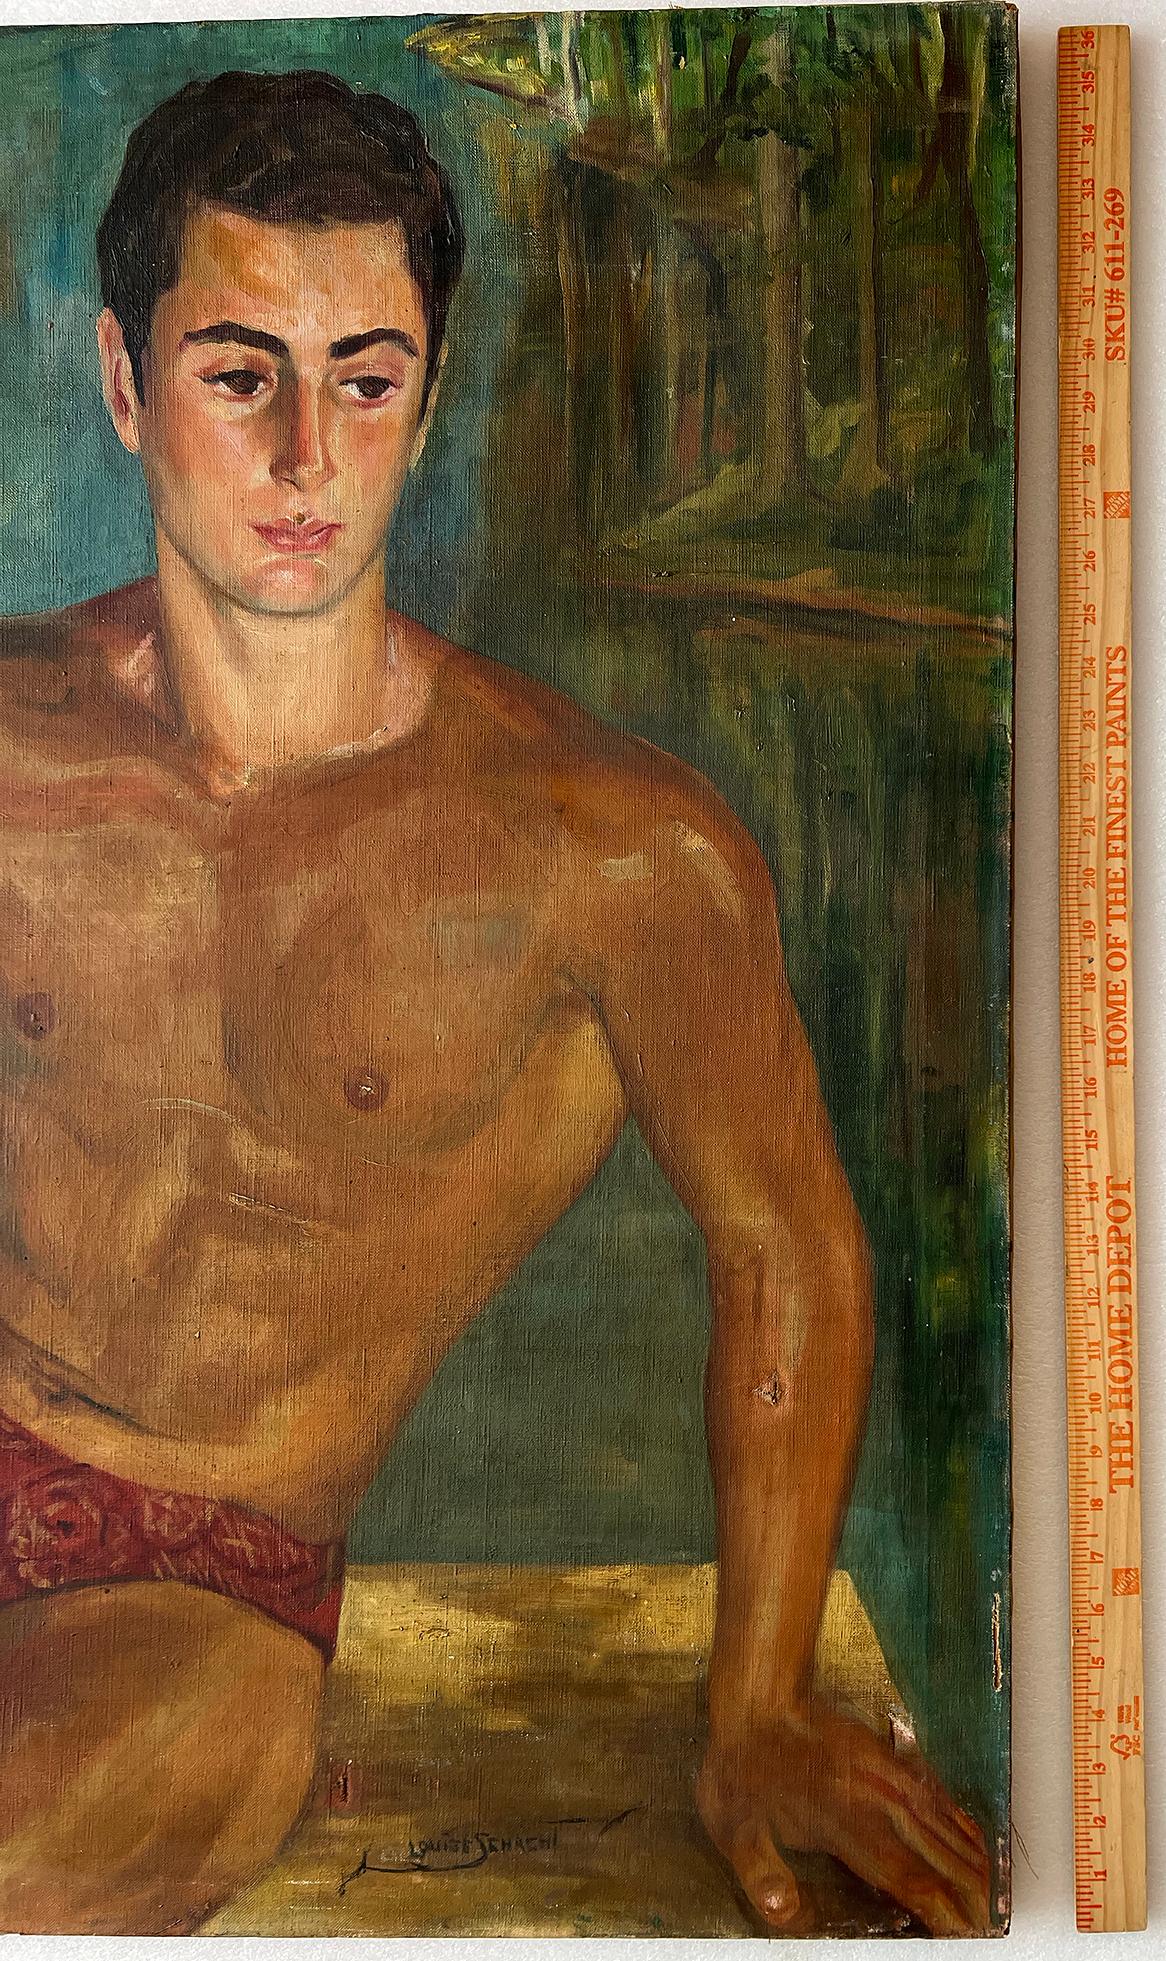 A handsome and fit young man with an introspective gaze is depicted in a  Speedo Bathing suit as he sits against a tropical lake. The work is unframed and in fair to poor condition but has soul and sex appeal to it. 
Louise Schacht was born on